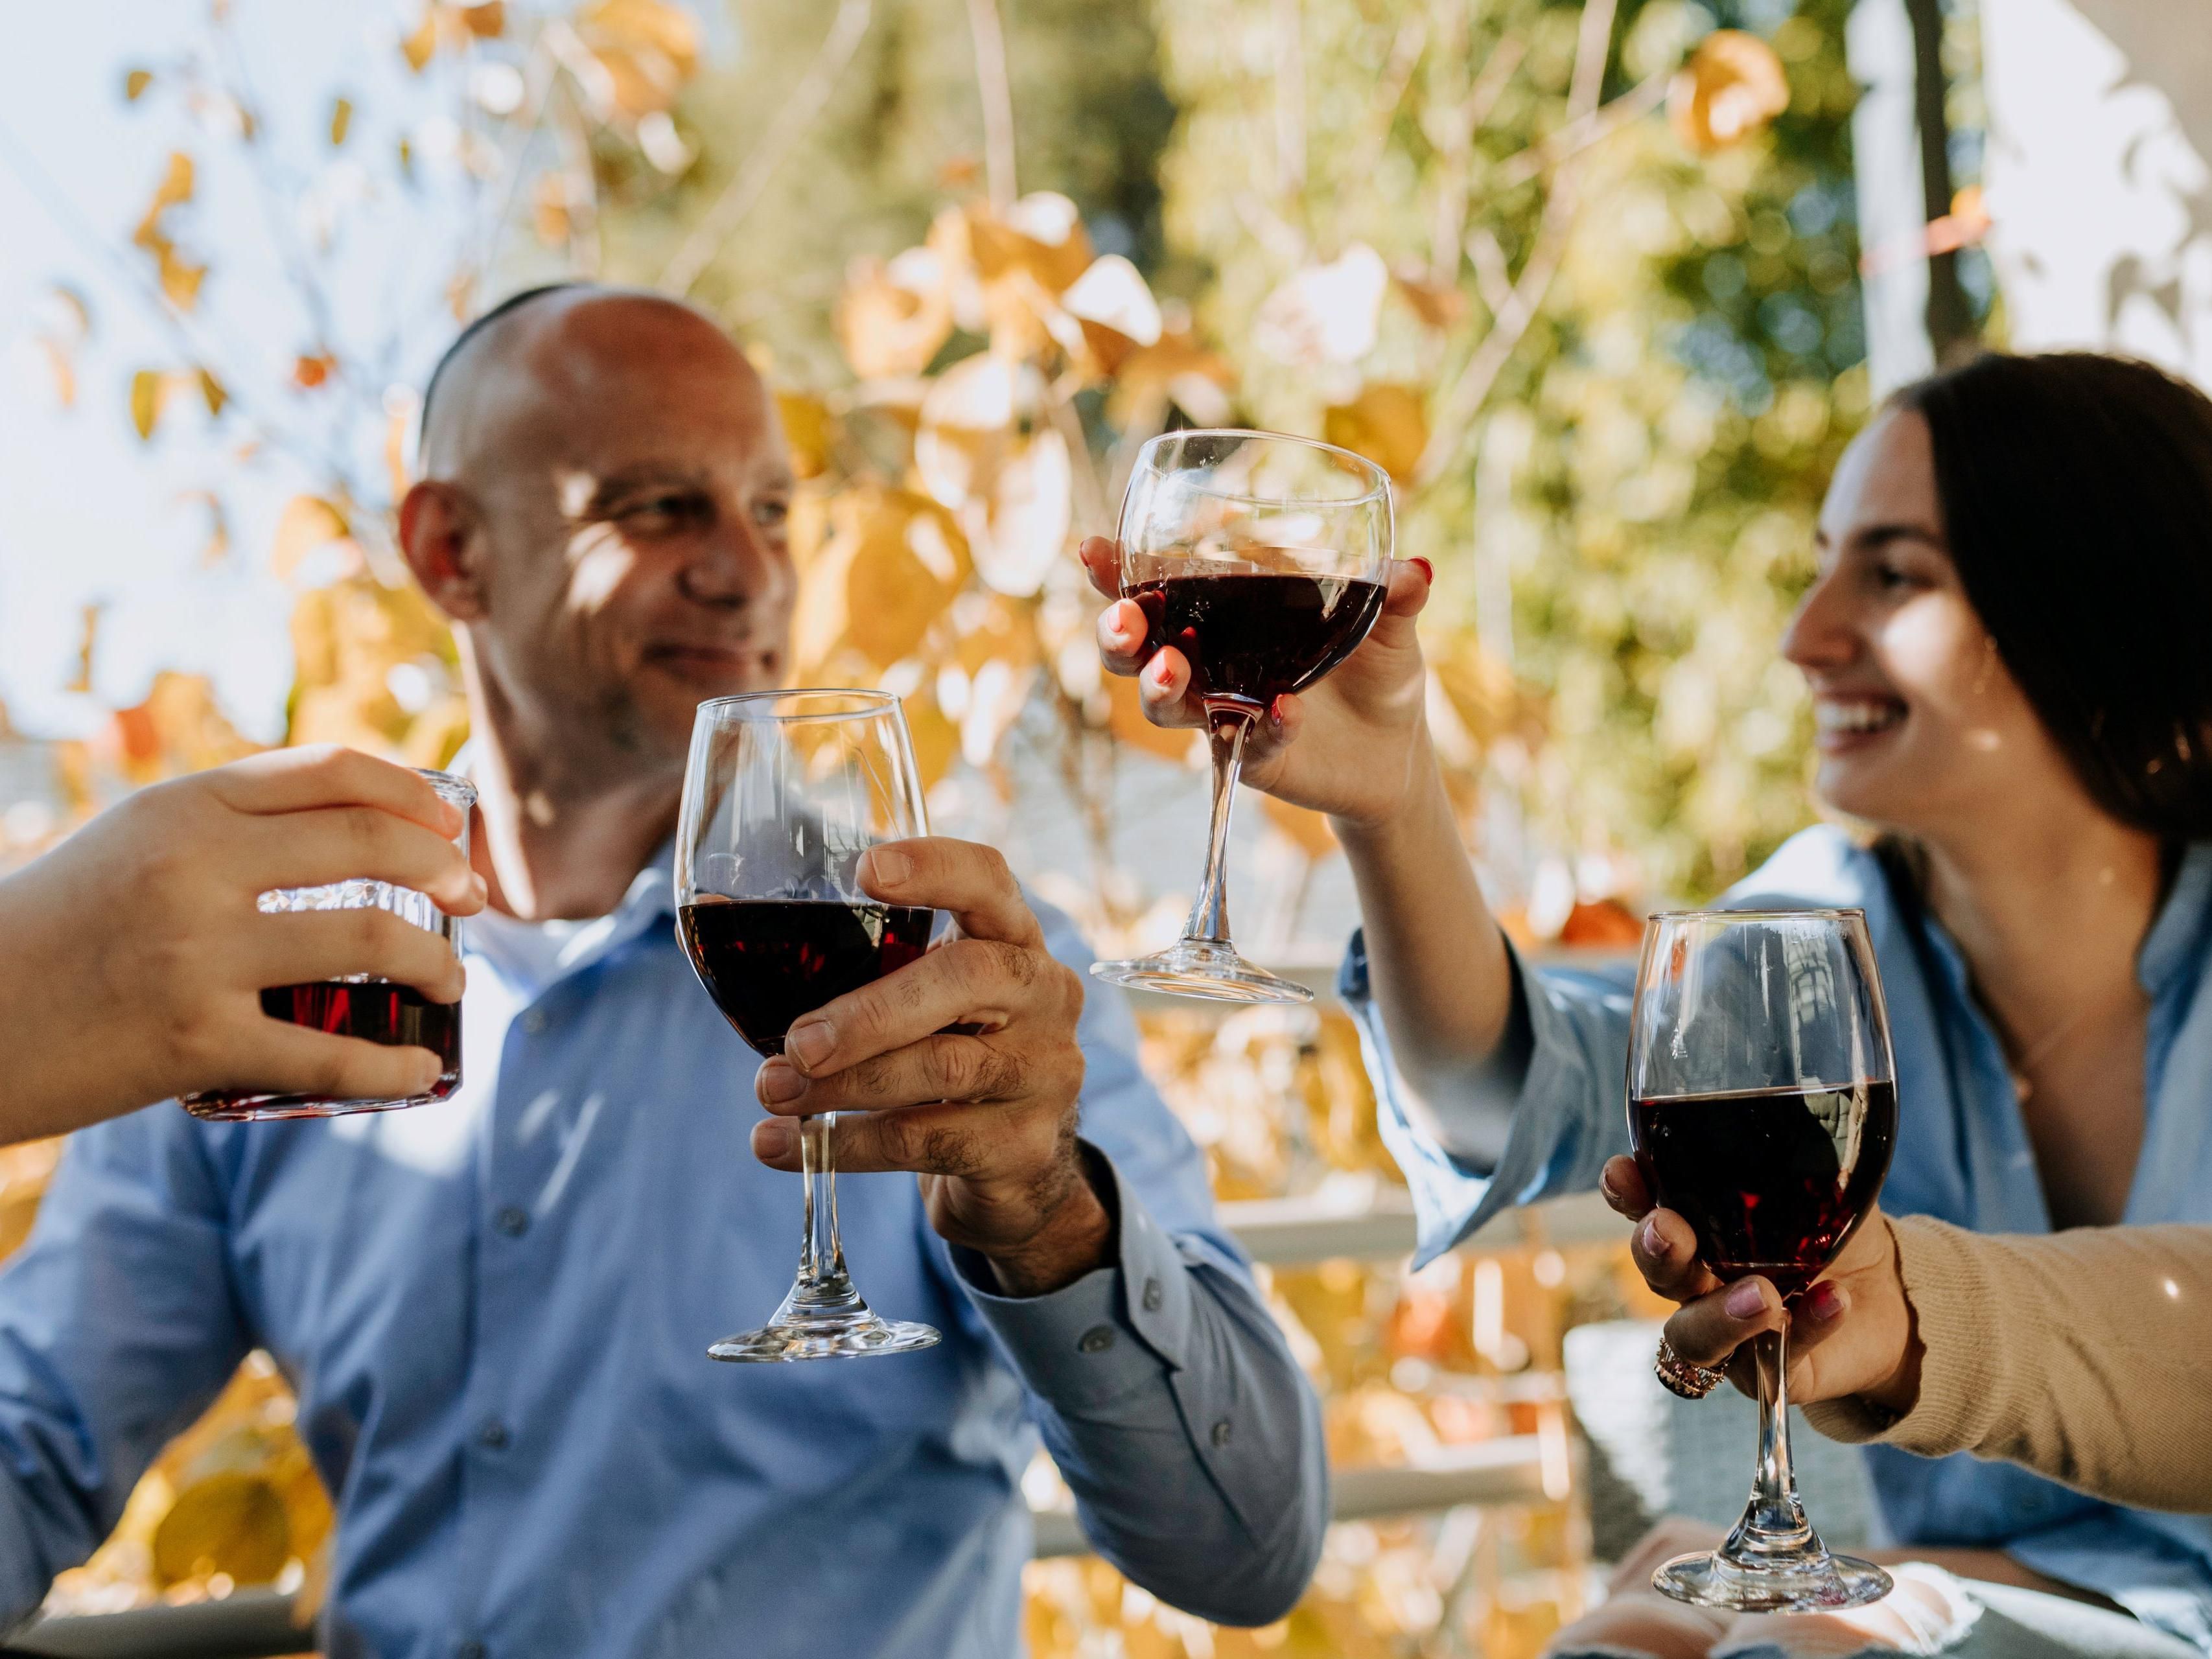 Plan Your Visit to Wine Country